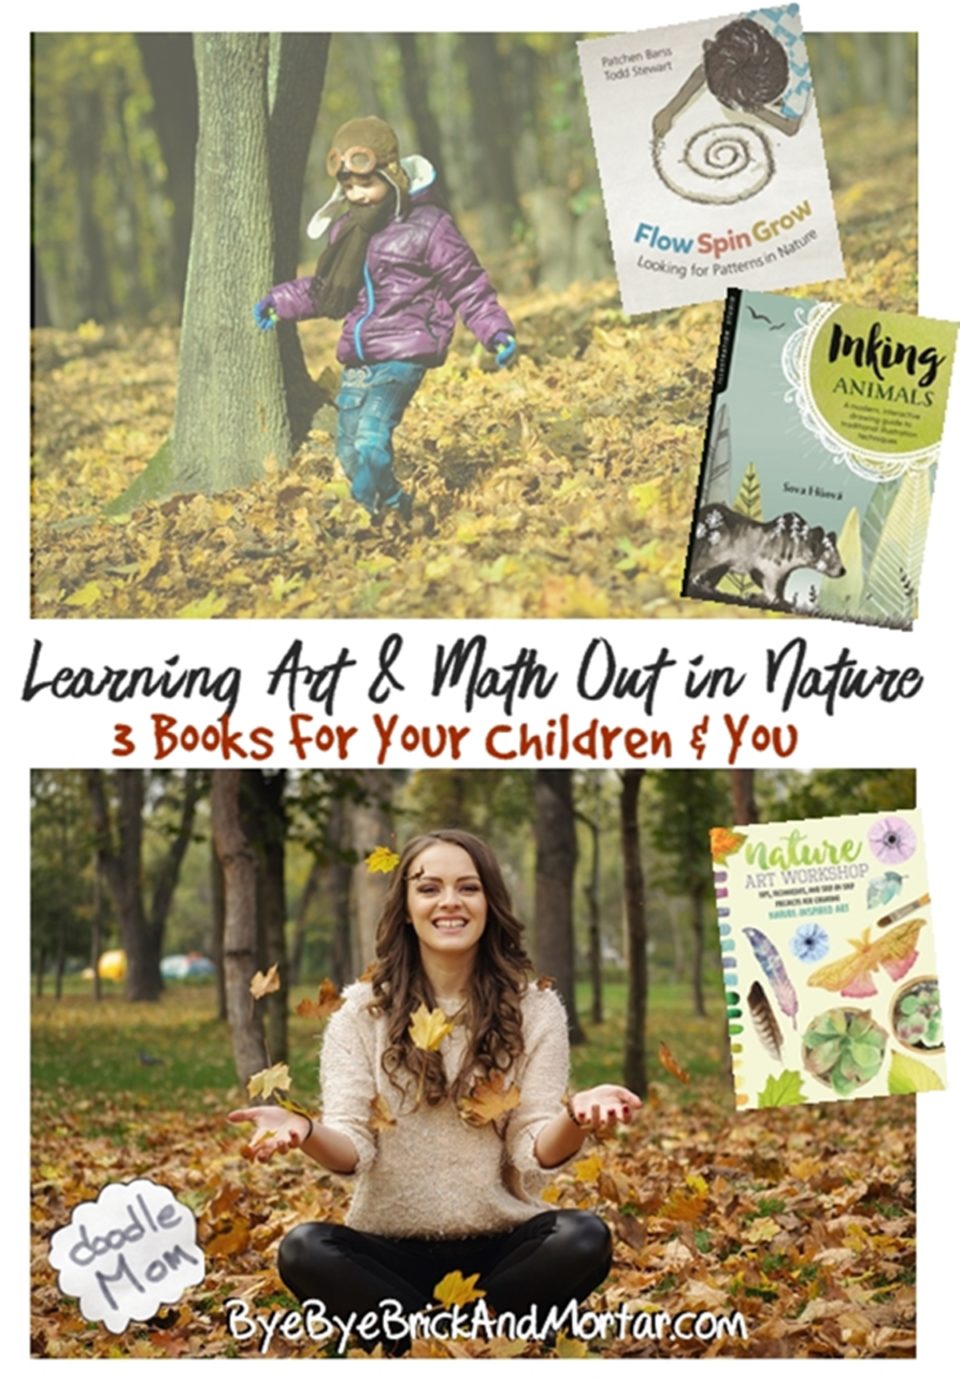 Learning Art & Math Out in Nature